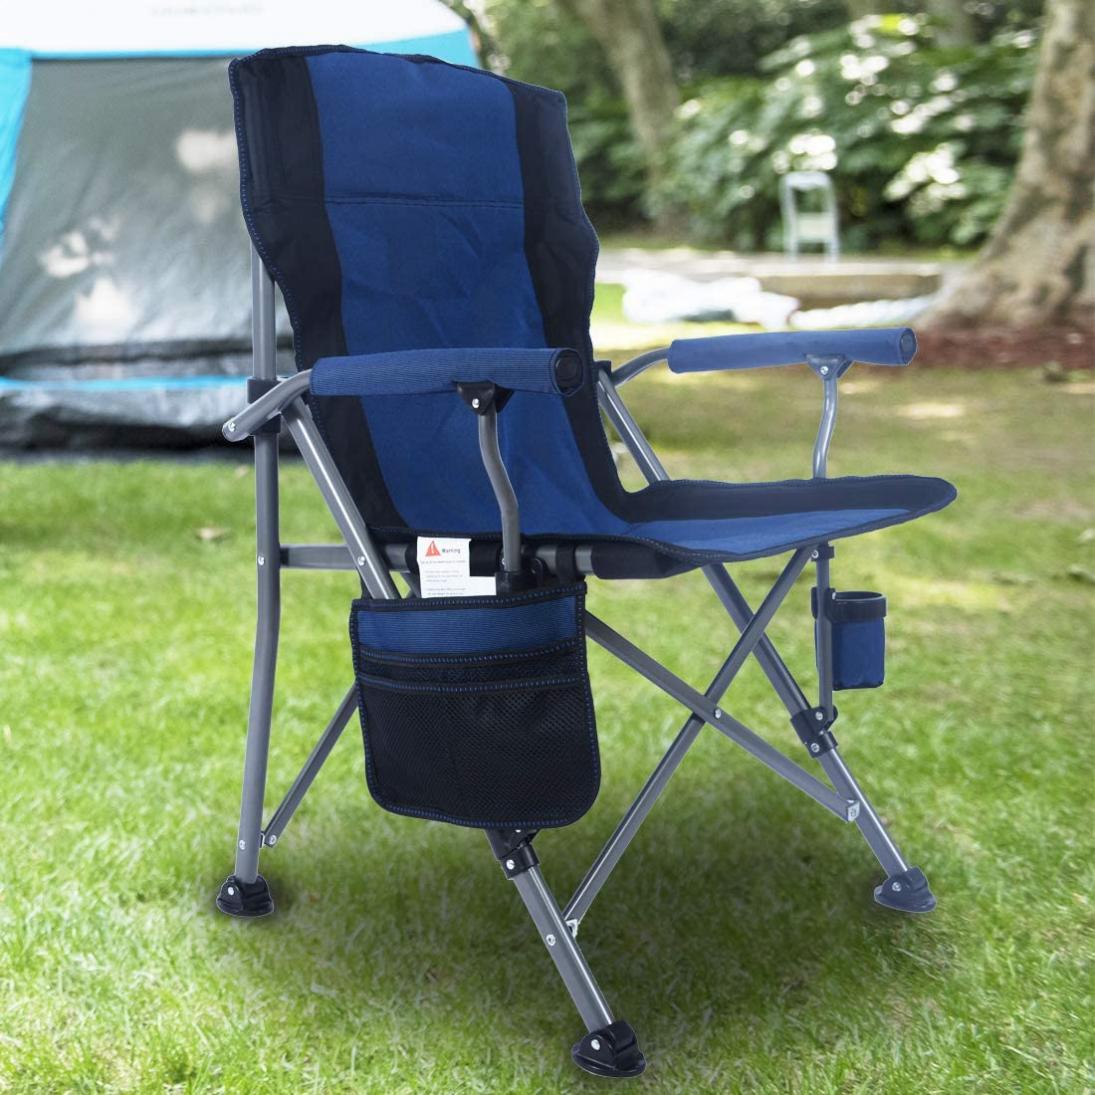 Homcosan Portable Camping Chair Folding Quad Outdoor Large Heavy Duty Support 330 lbs Thicken 600D Oxford with Padded Armrests, Storage Bag, Beverage Holder, Carry Bag for Outside(Blue)